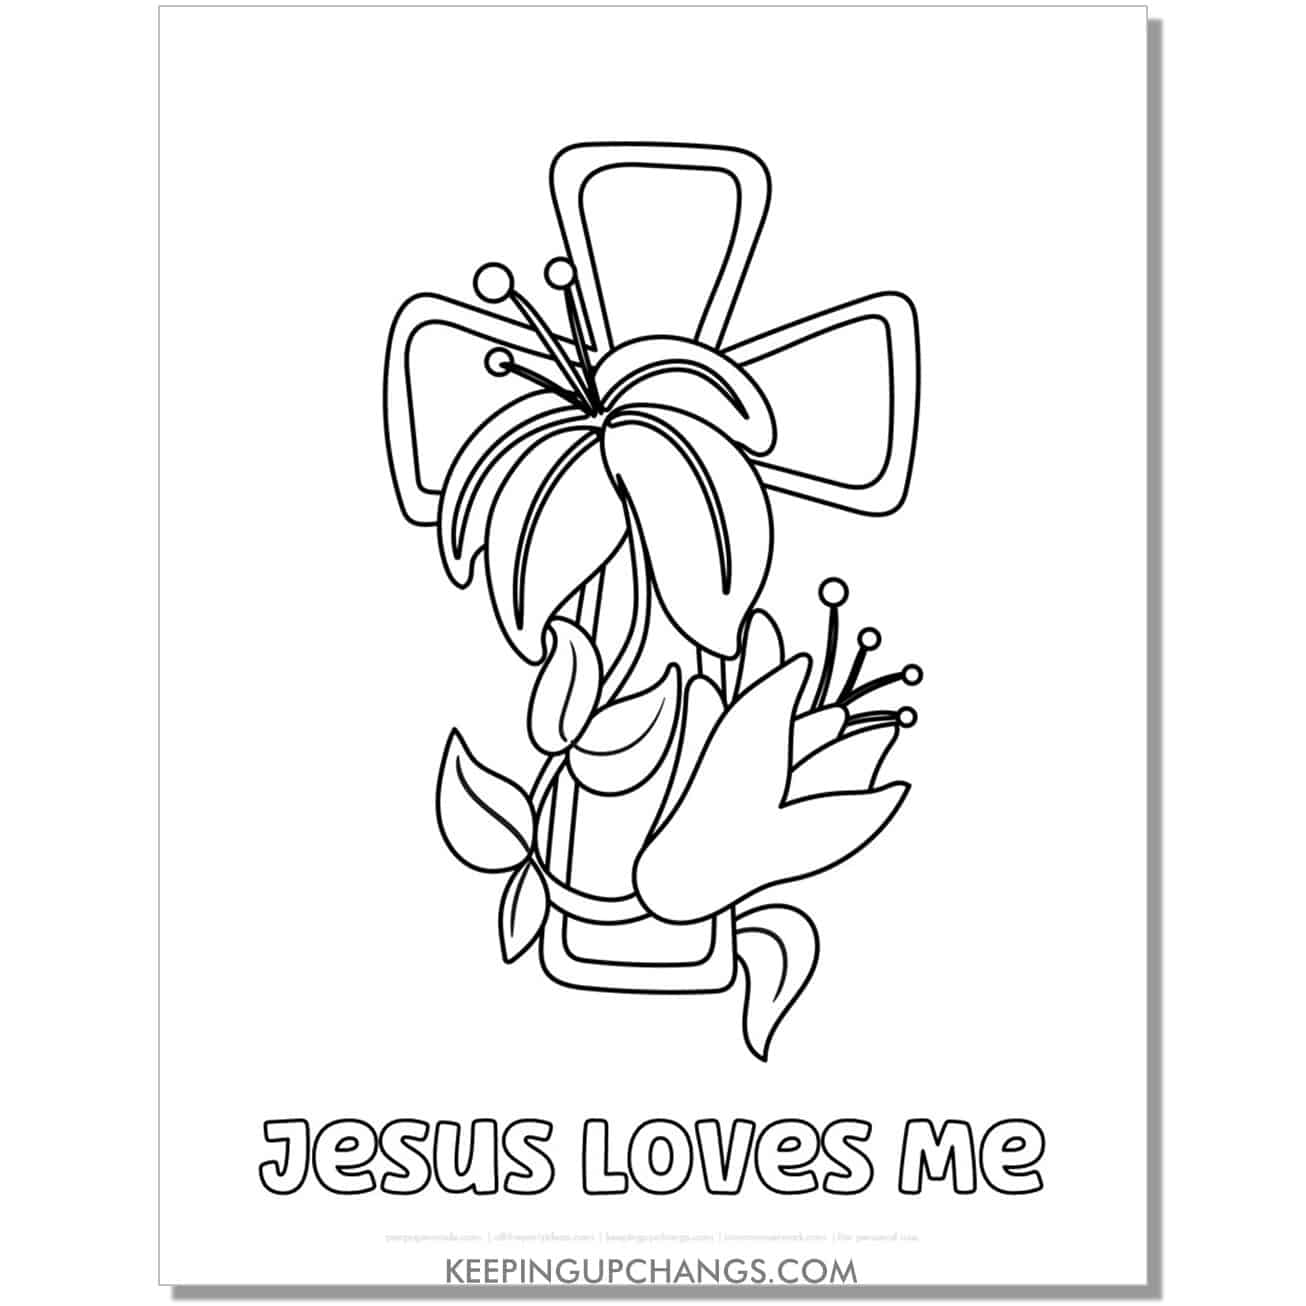 jesus loves me church cross wrapped with lily religious easter coloring page, sheet